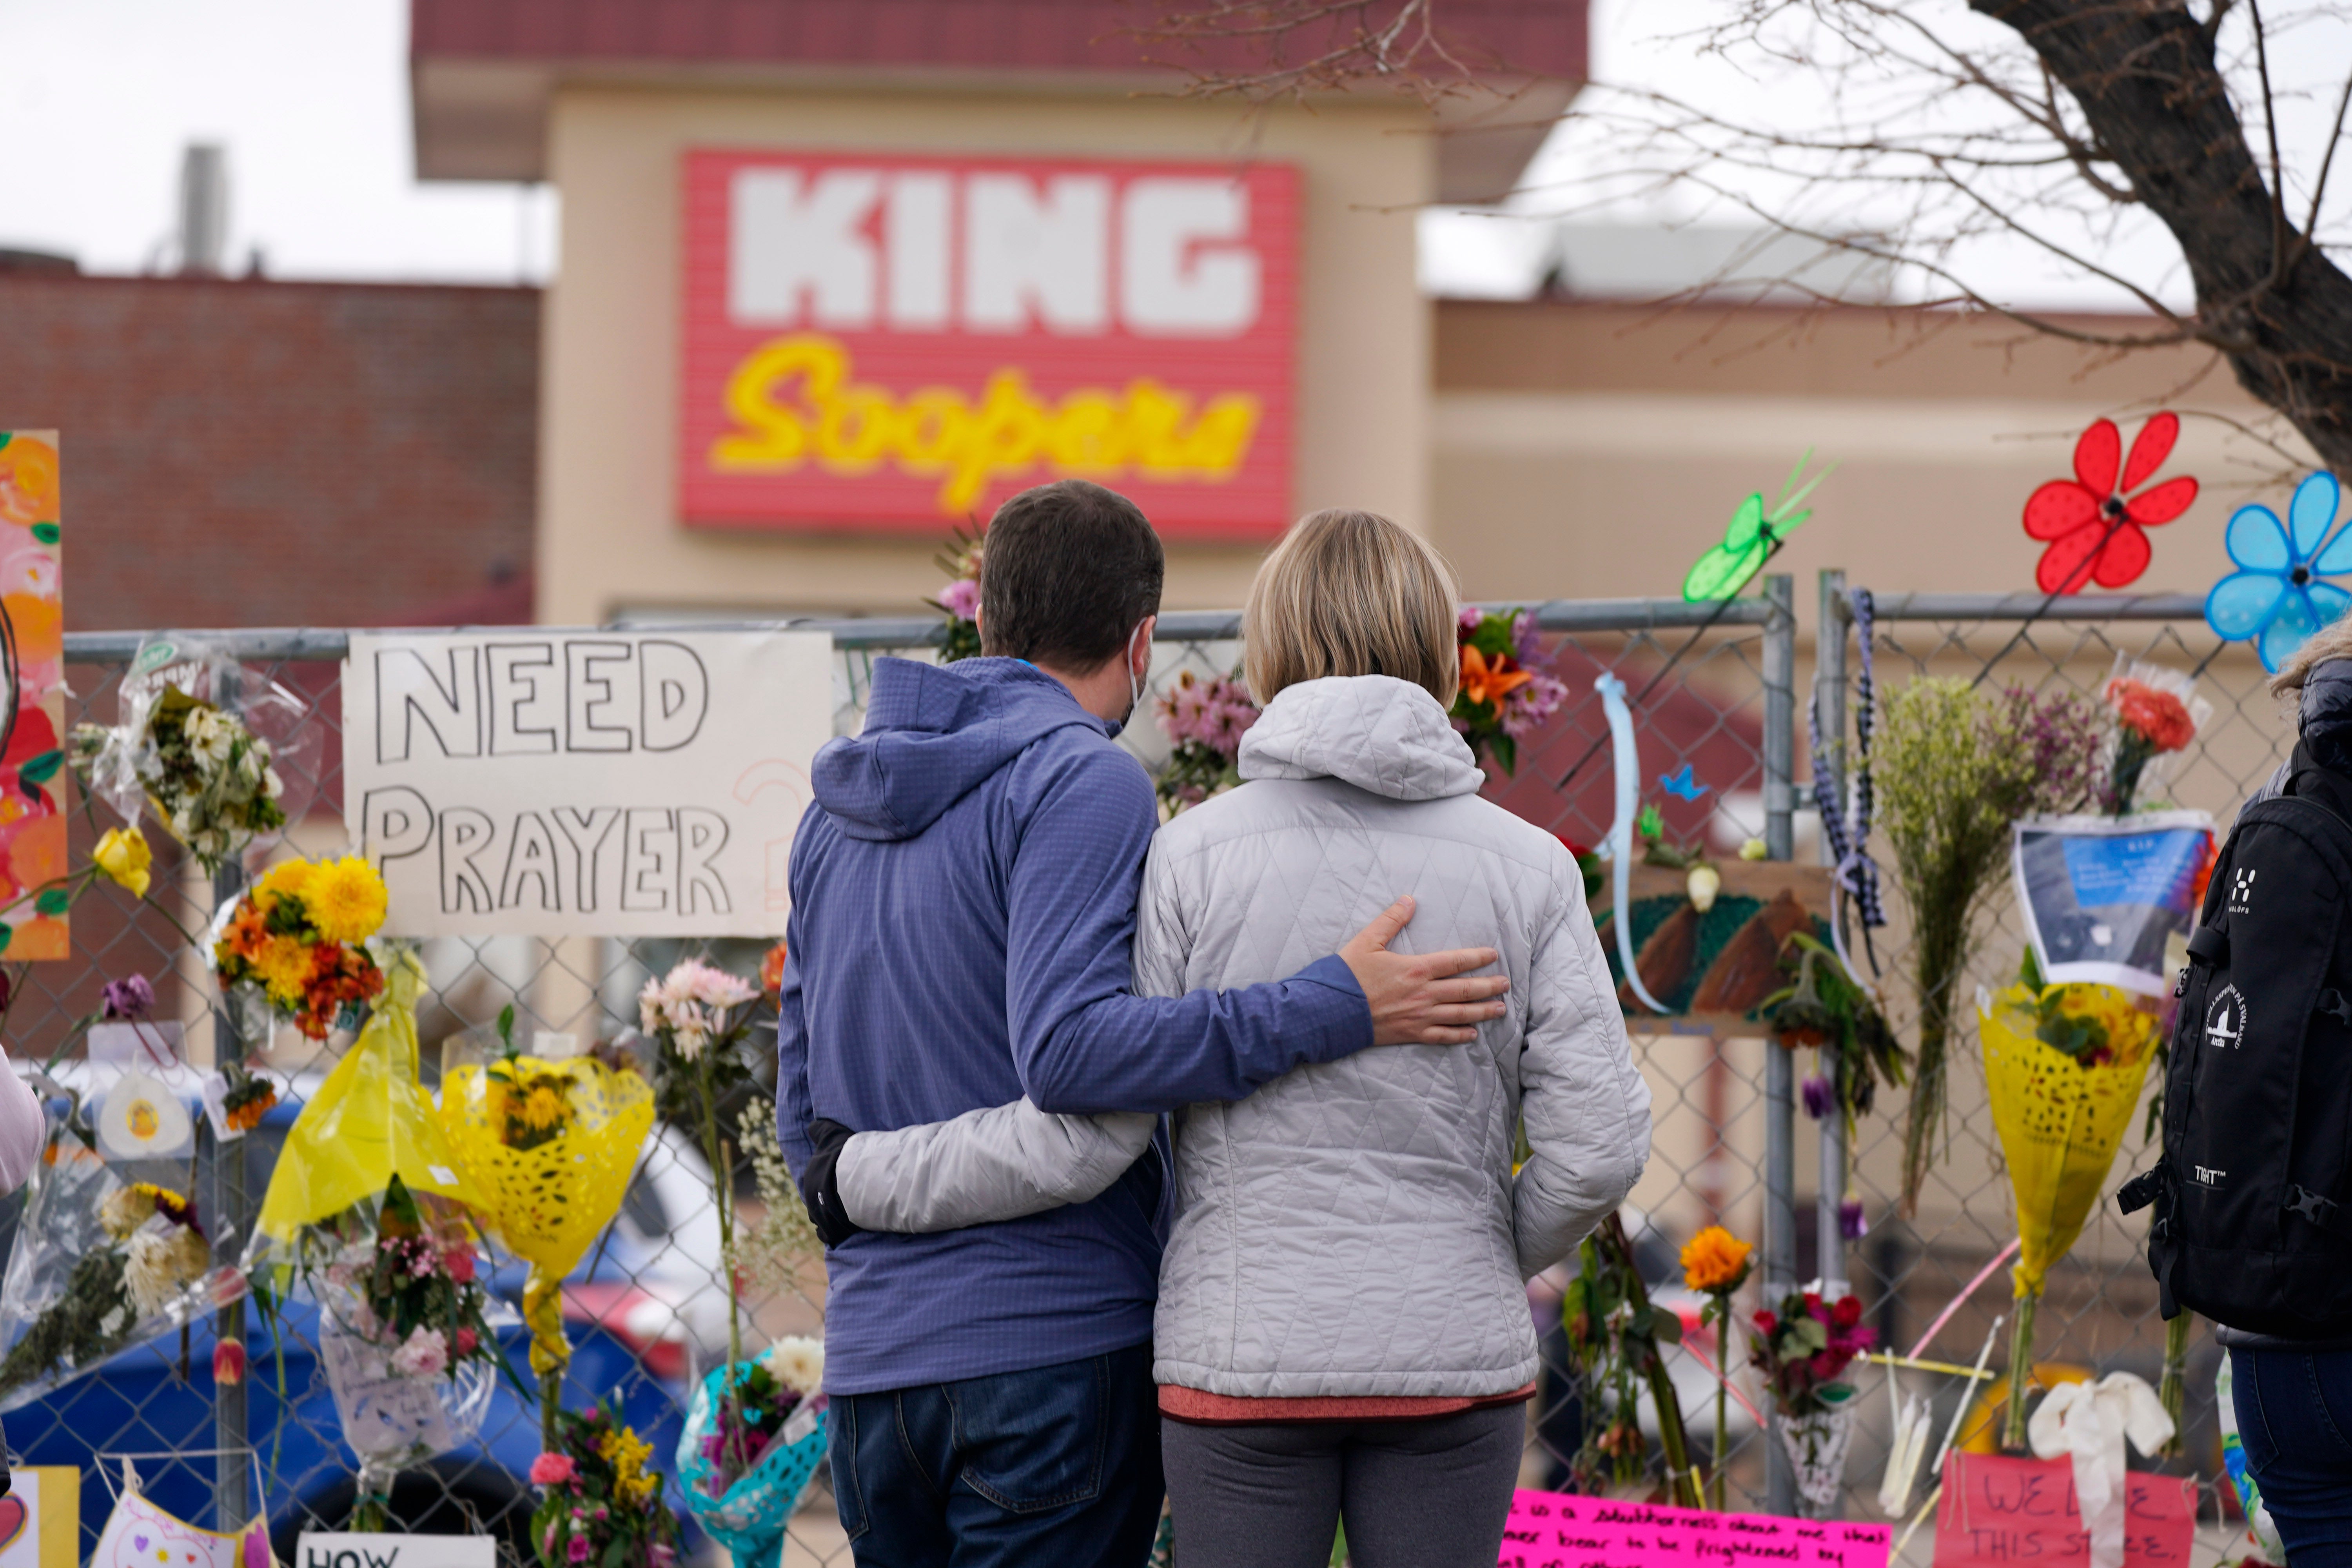 Mourners outside of the King Soopers grocery store in Boulder, Colorado